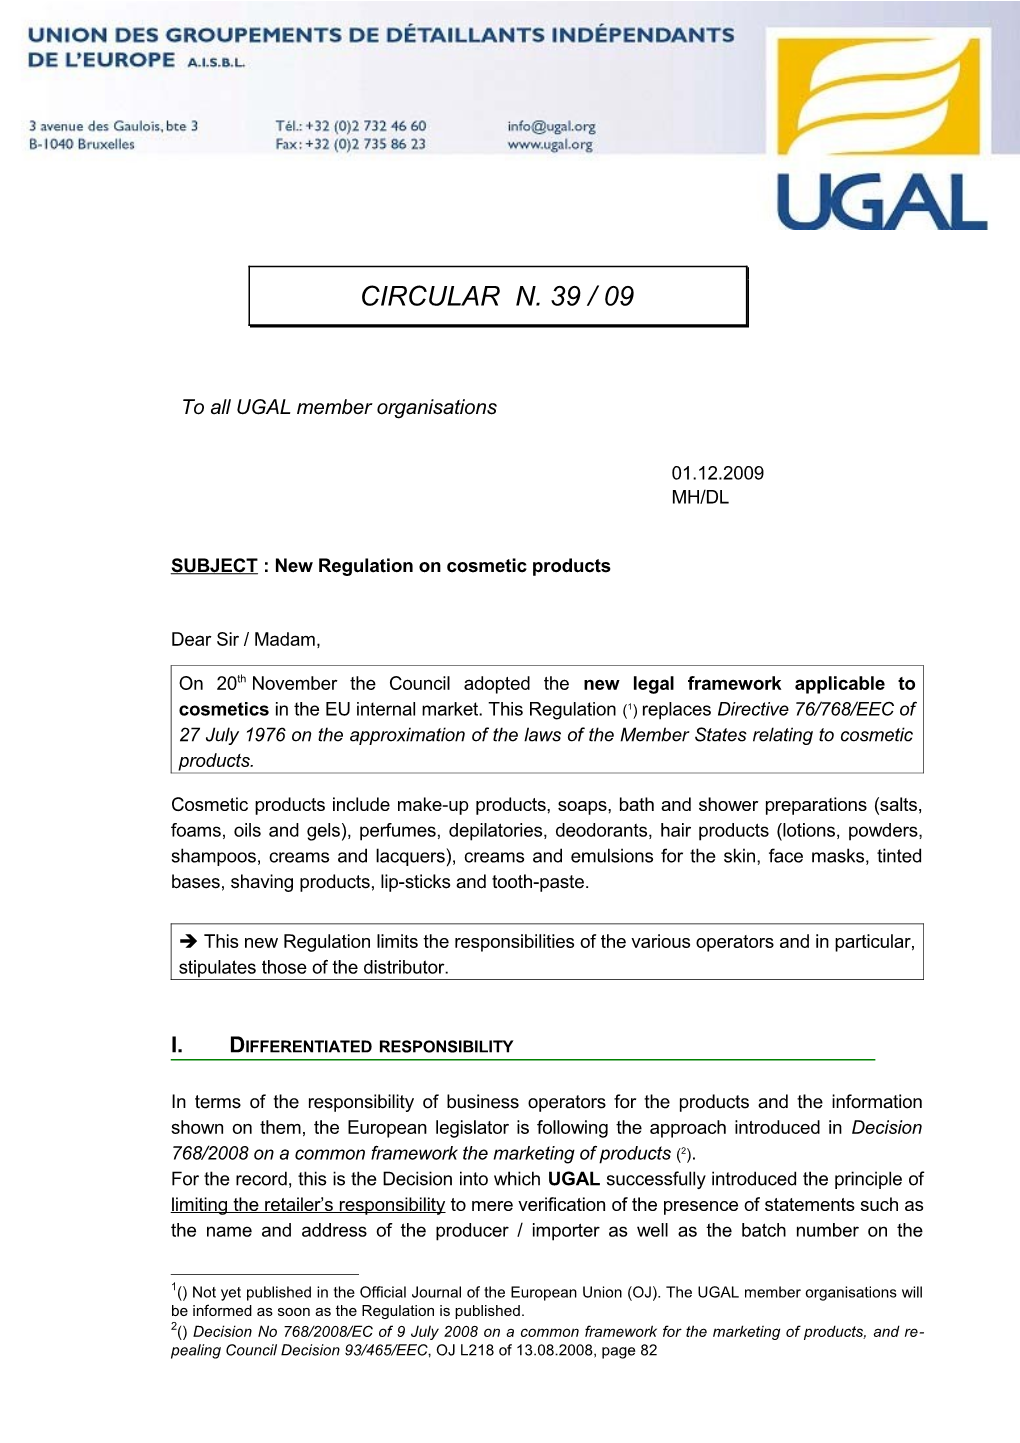 SUBJECT: New Regulation on Cosmetic Products